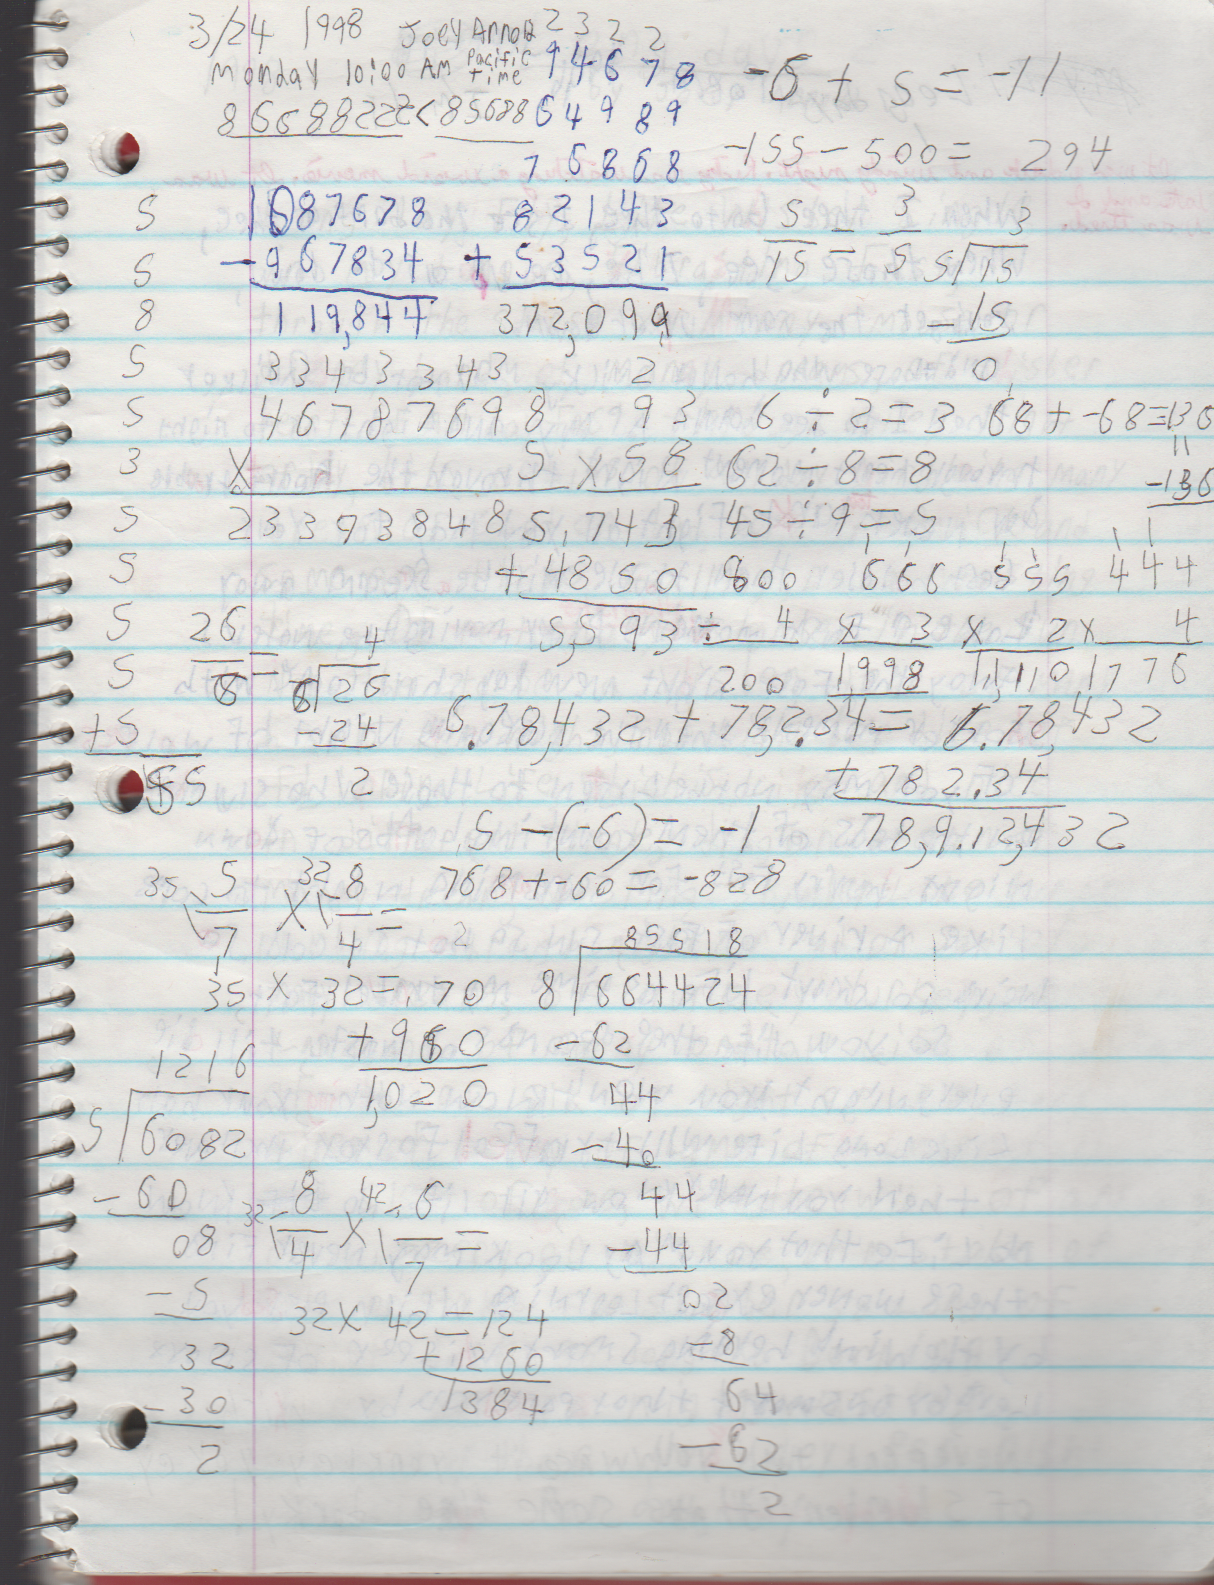 1996-08-18 - Saturday - 11 yr old Joey Arnold's School Book, dates through to 1998 apx, mostly 96, Writings, Drawings, Etc-045.png